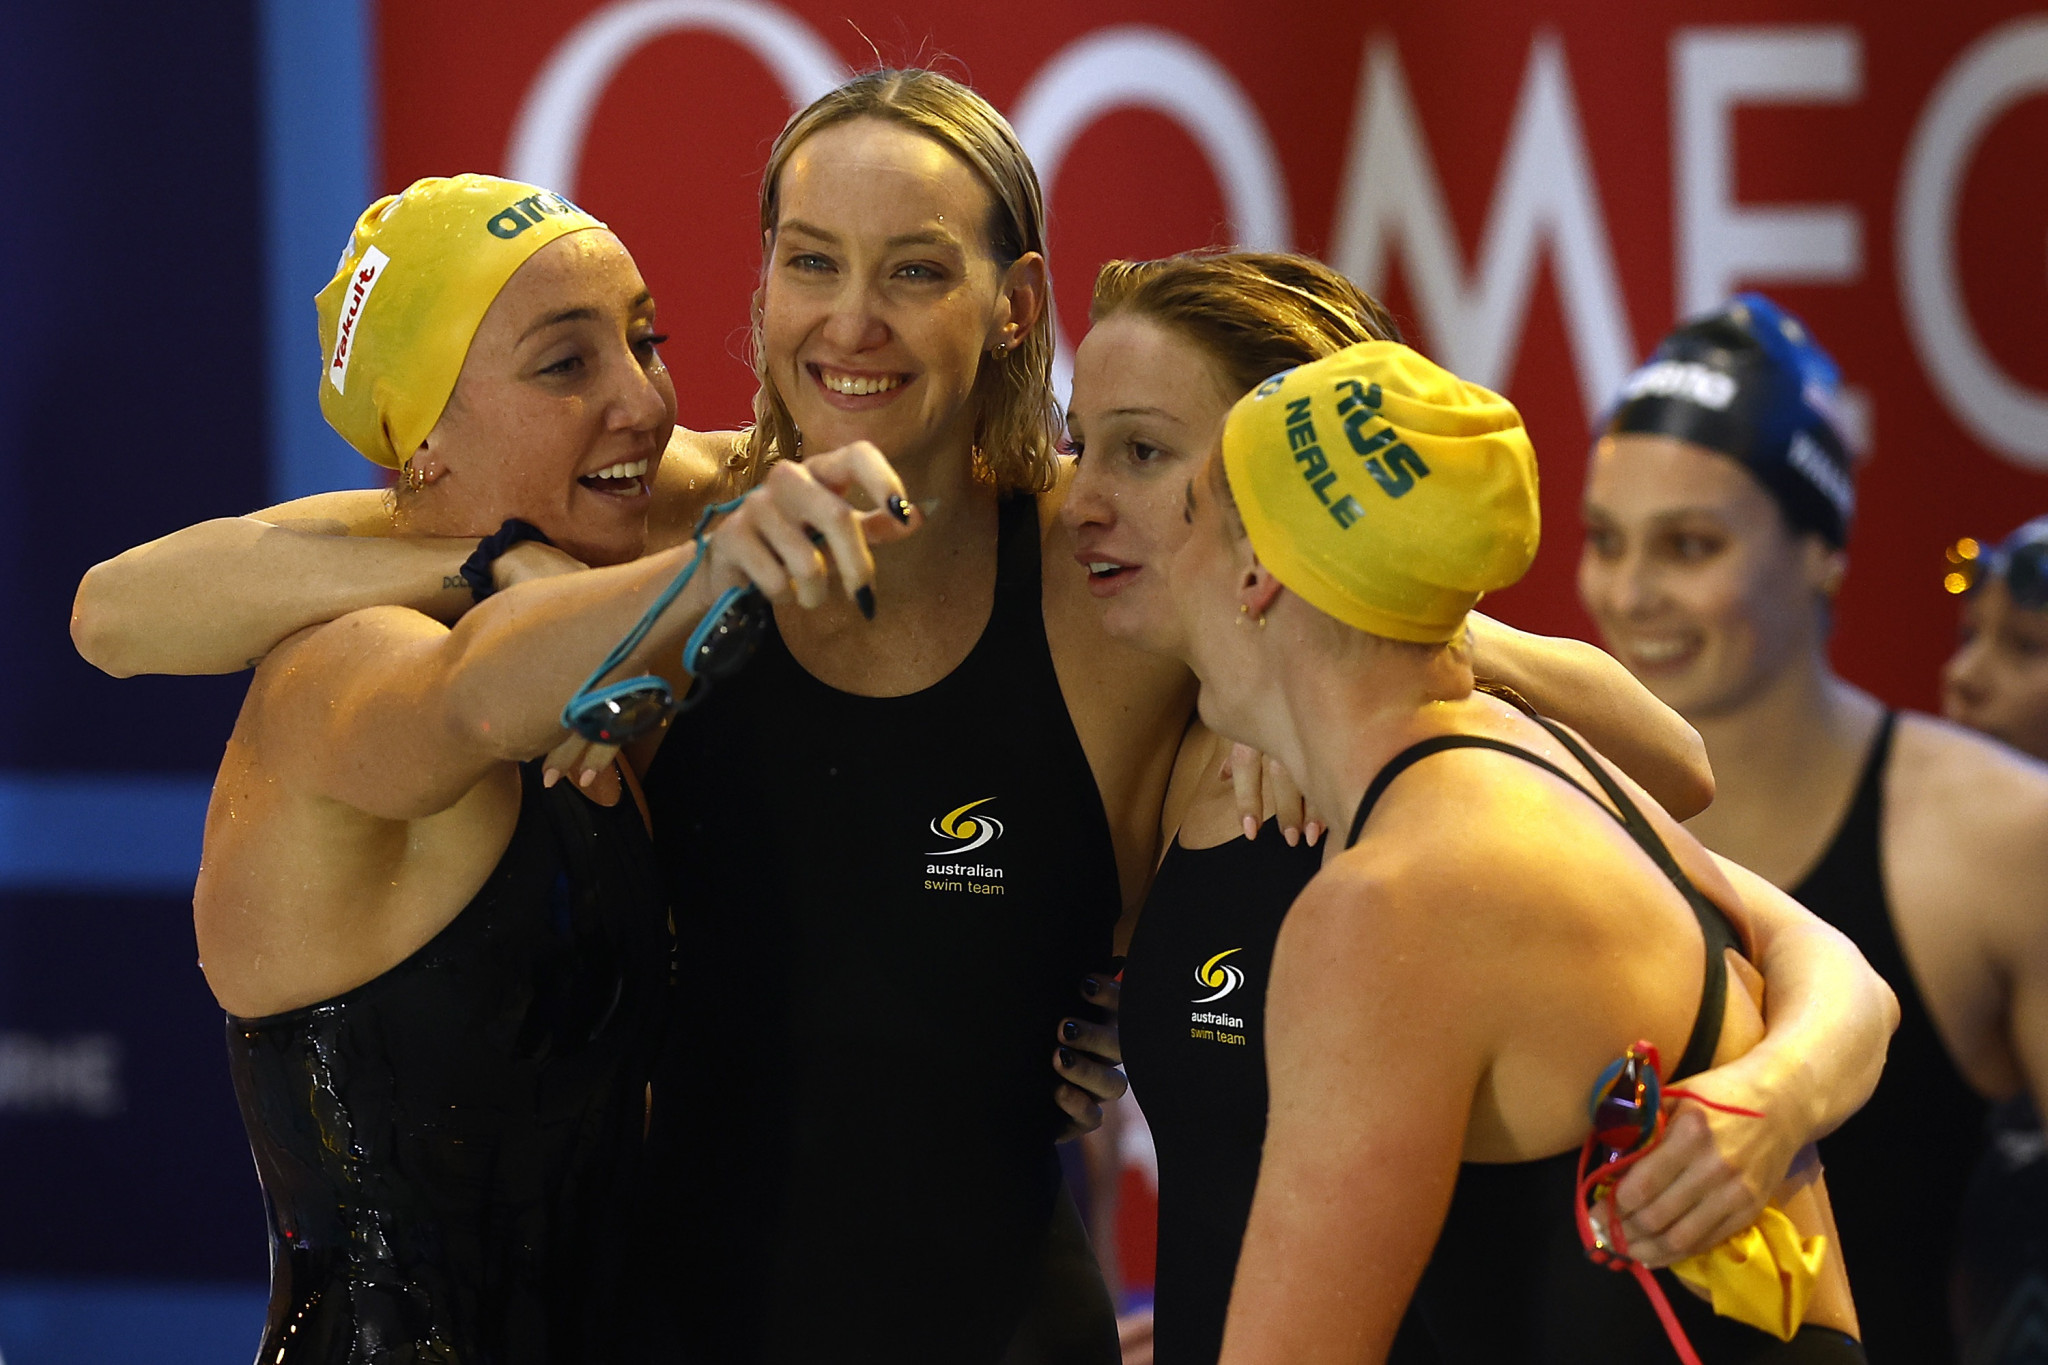 Pallister was part of the Australian team that were crowned world champions in the women's 4x200m freestyel relay after breaking the world record ©Getty Images